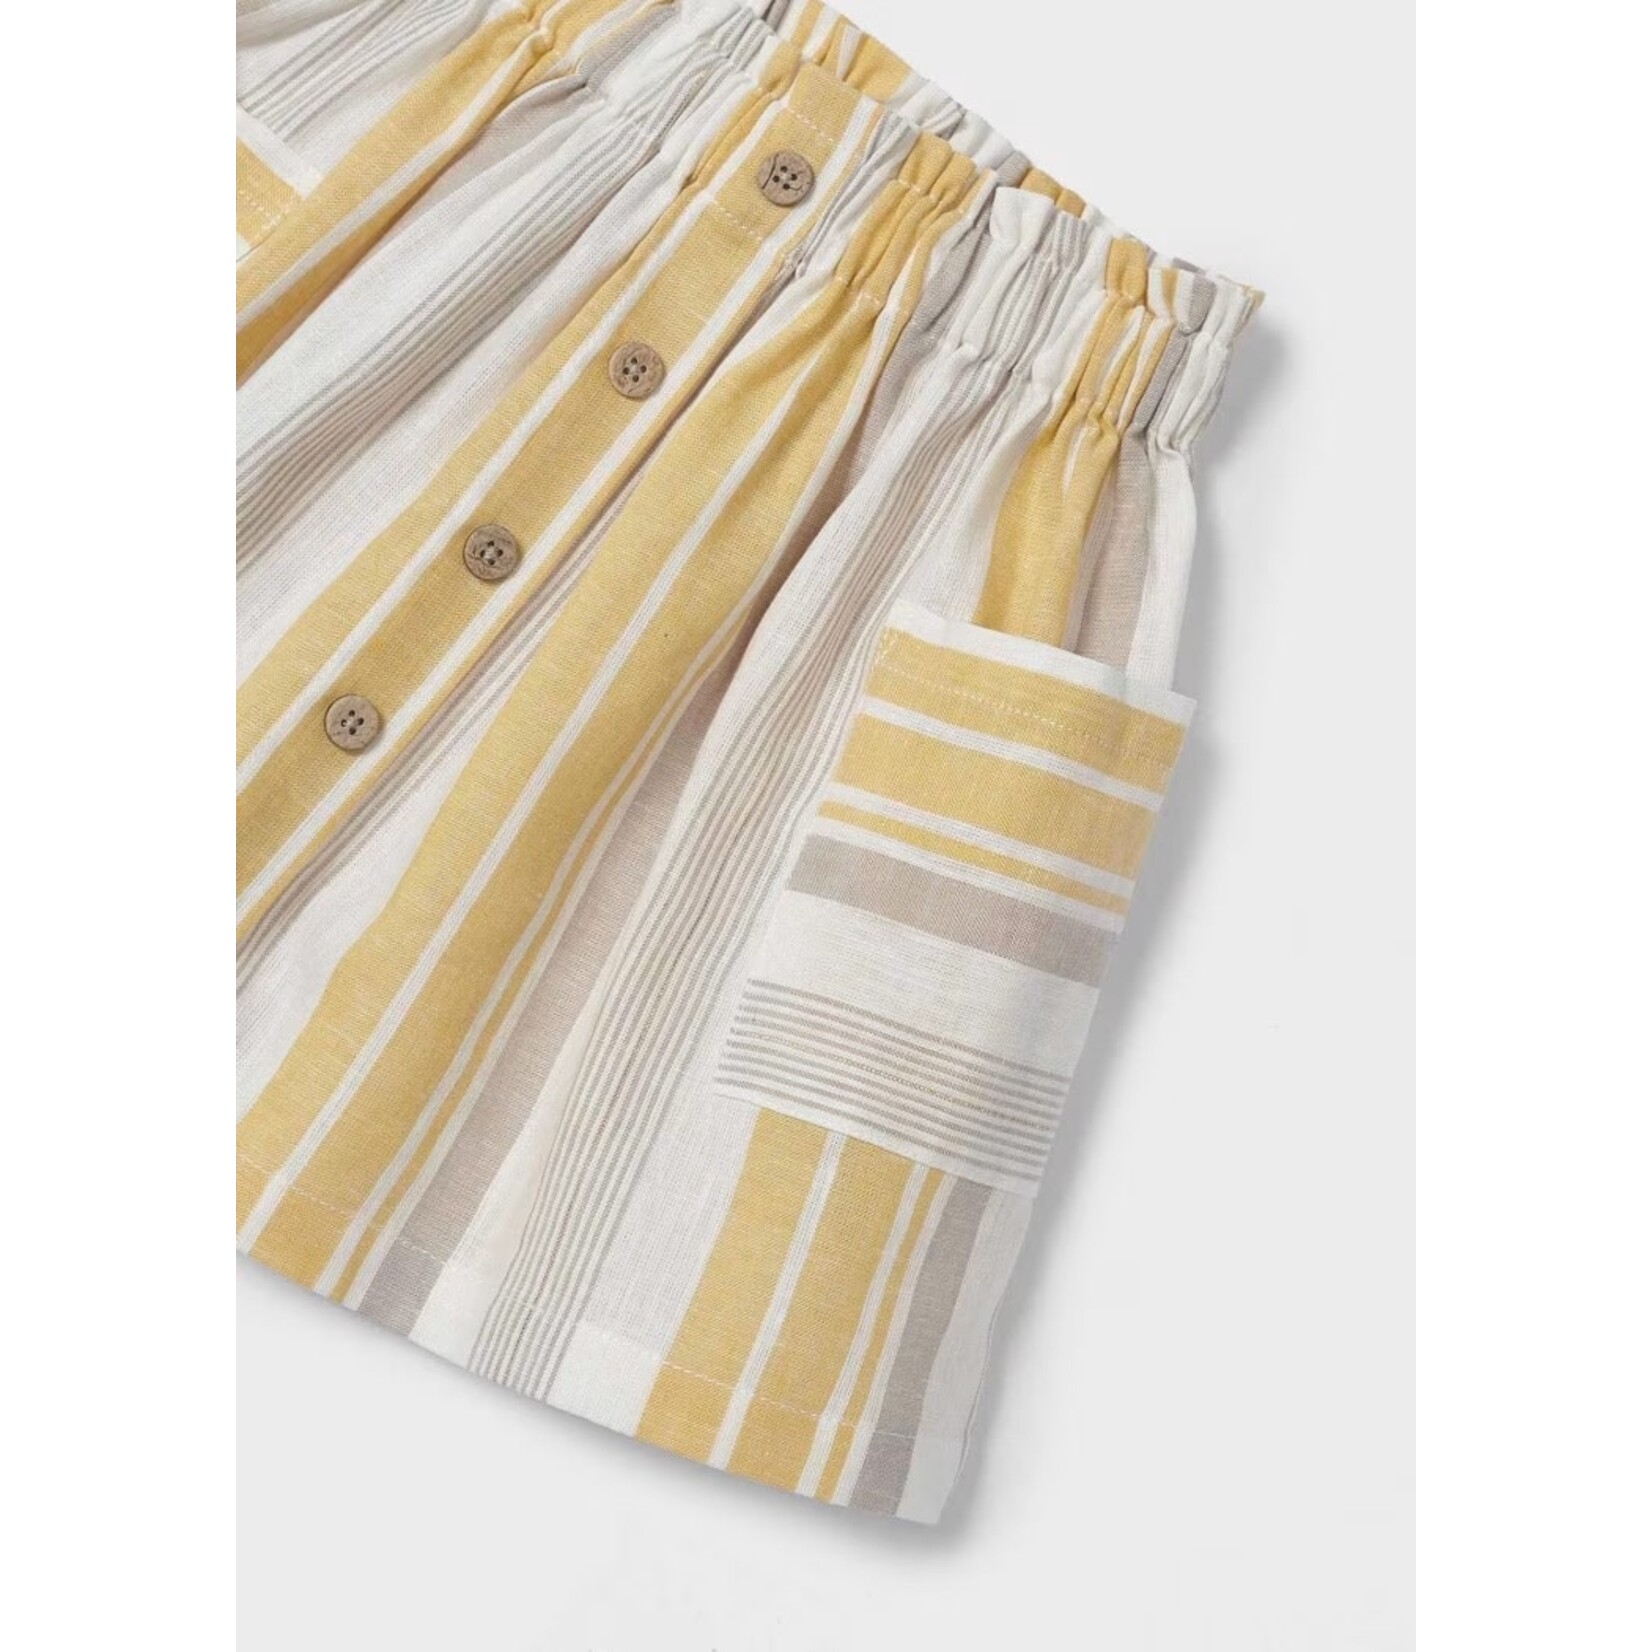 Mayoral MAYORAL - Linen Skirt with Vertical Stripes in Yellow, Ecru and Taupe